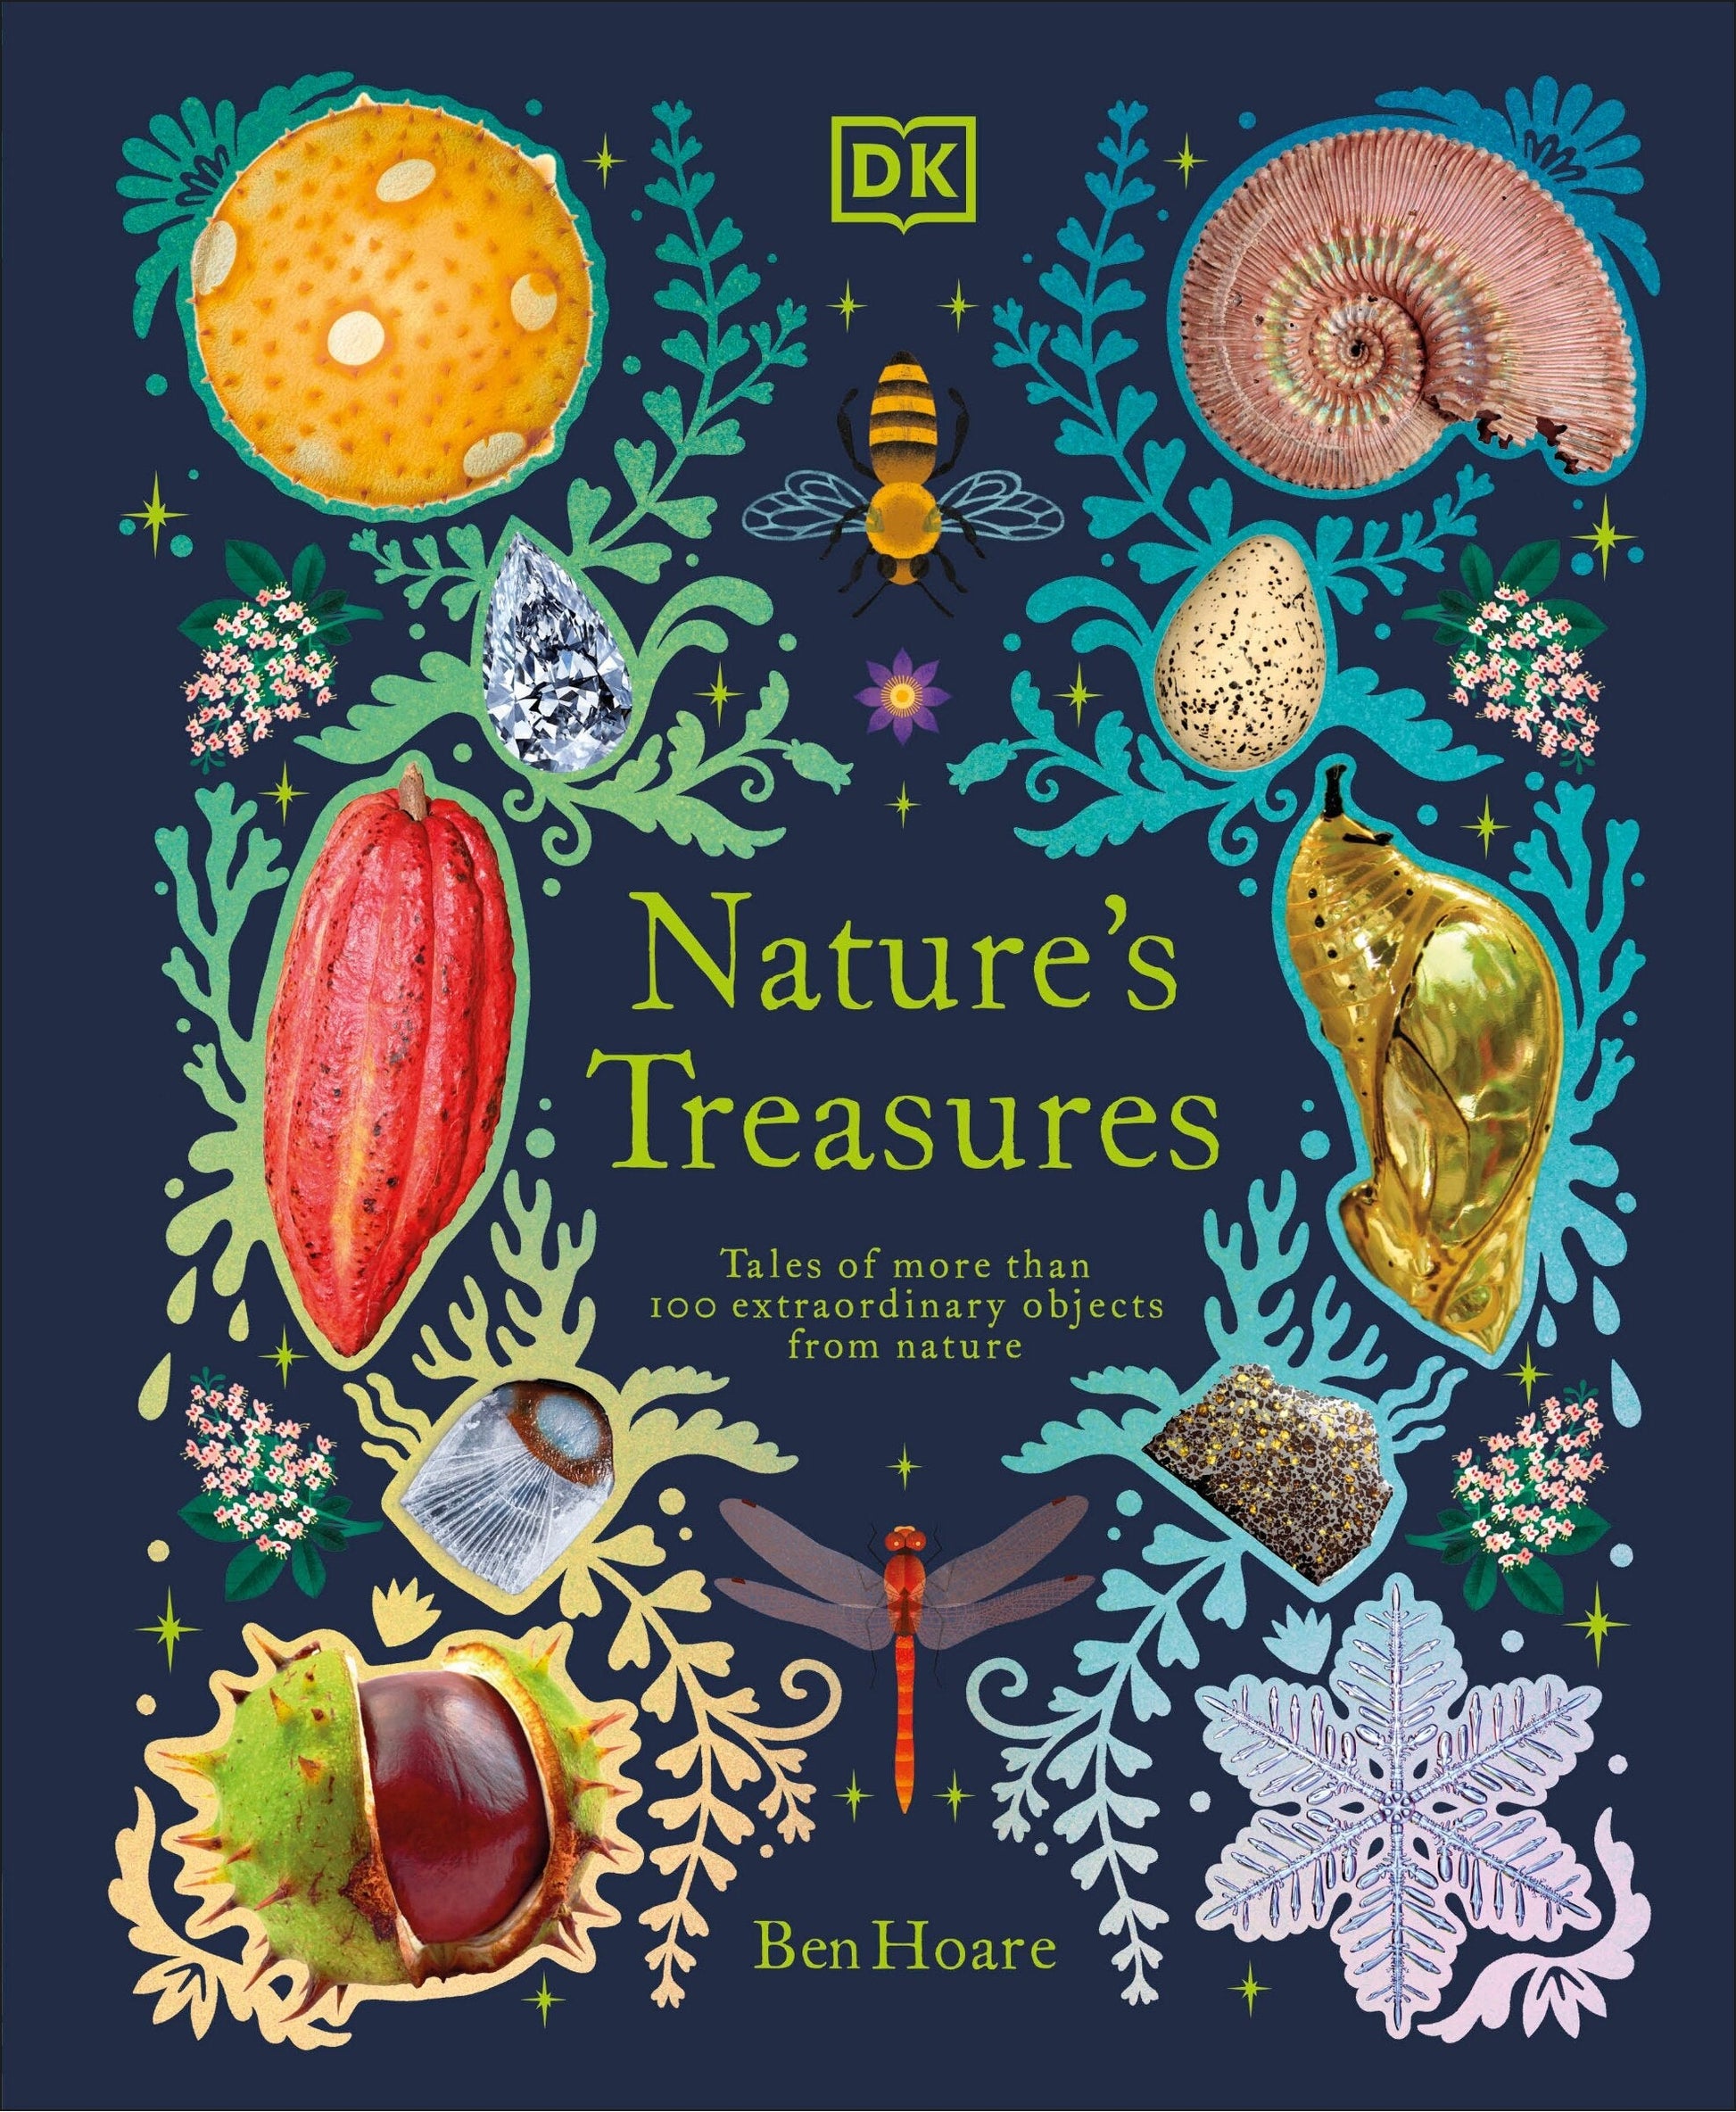 Nature's Treasures: Tales of More Than 100 Extraordinary Objects from Nature - Hoare, Ben (Hardcover)-Science-9780744034950-BookBizCanada